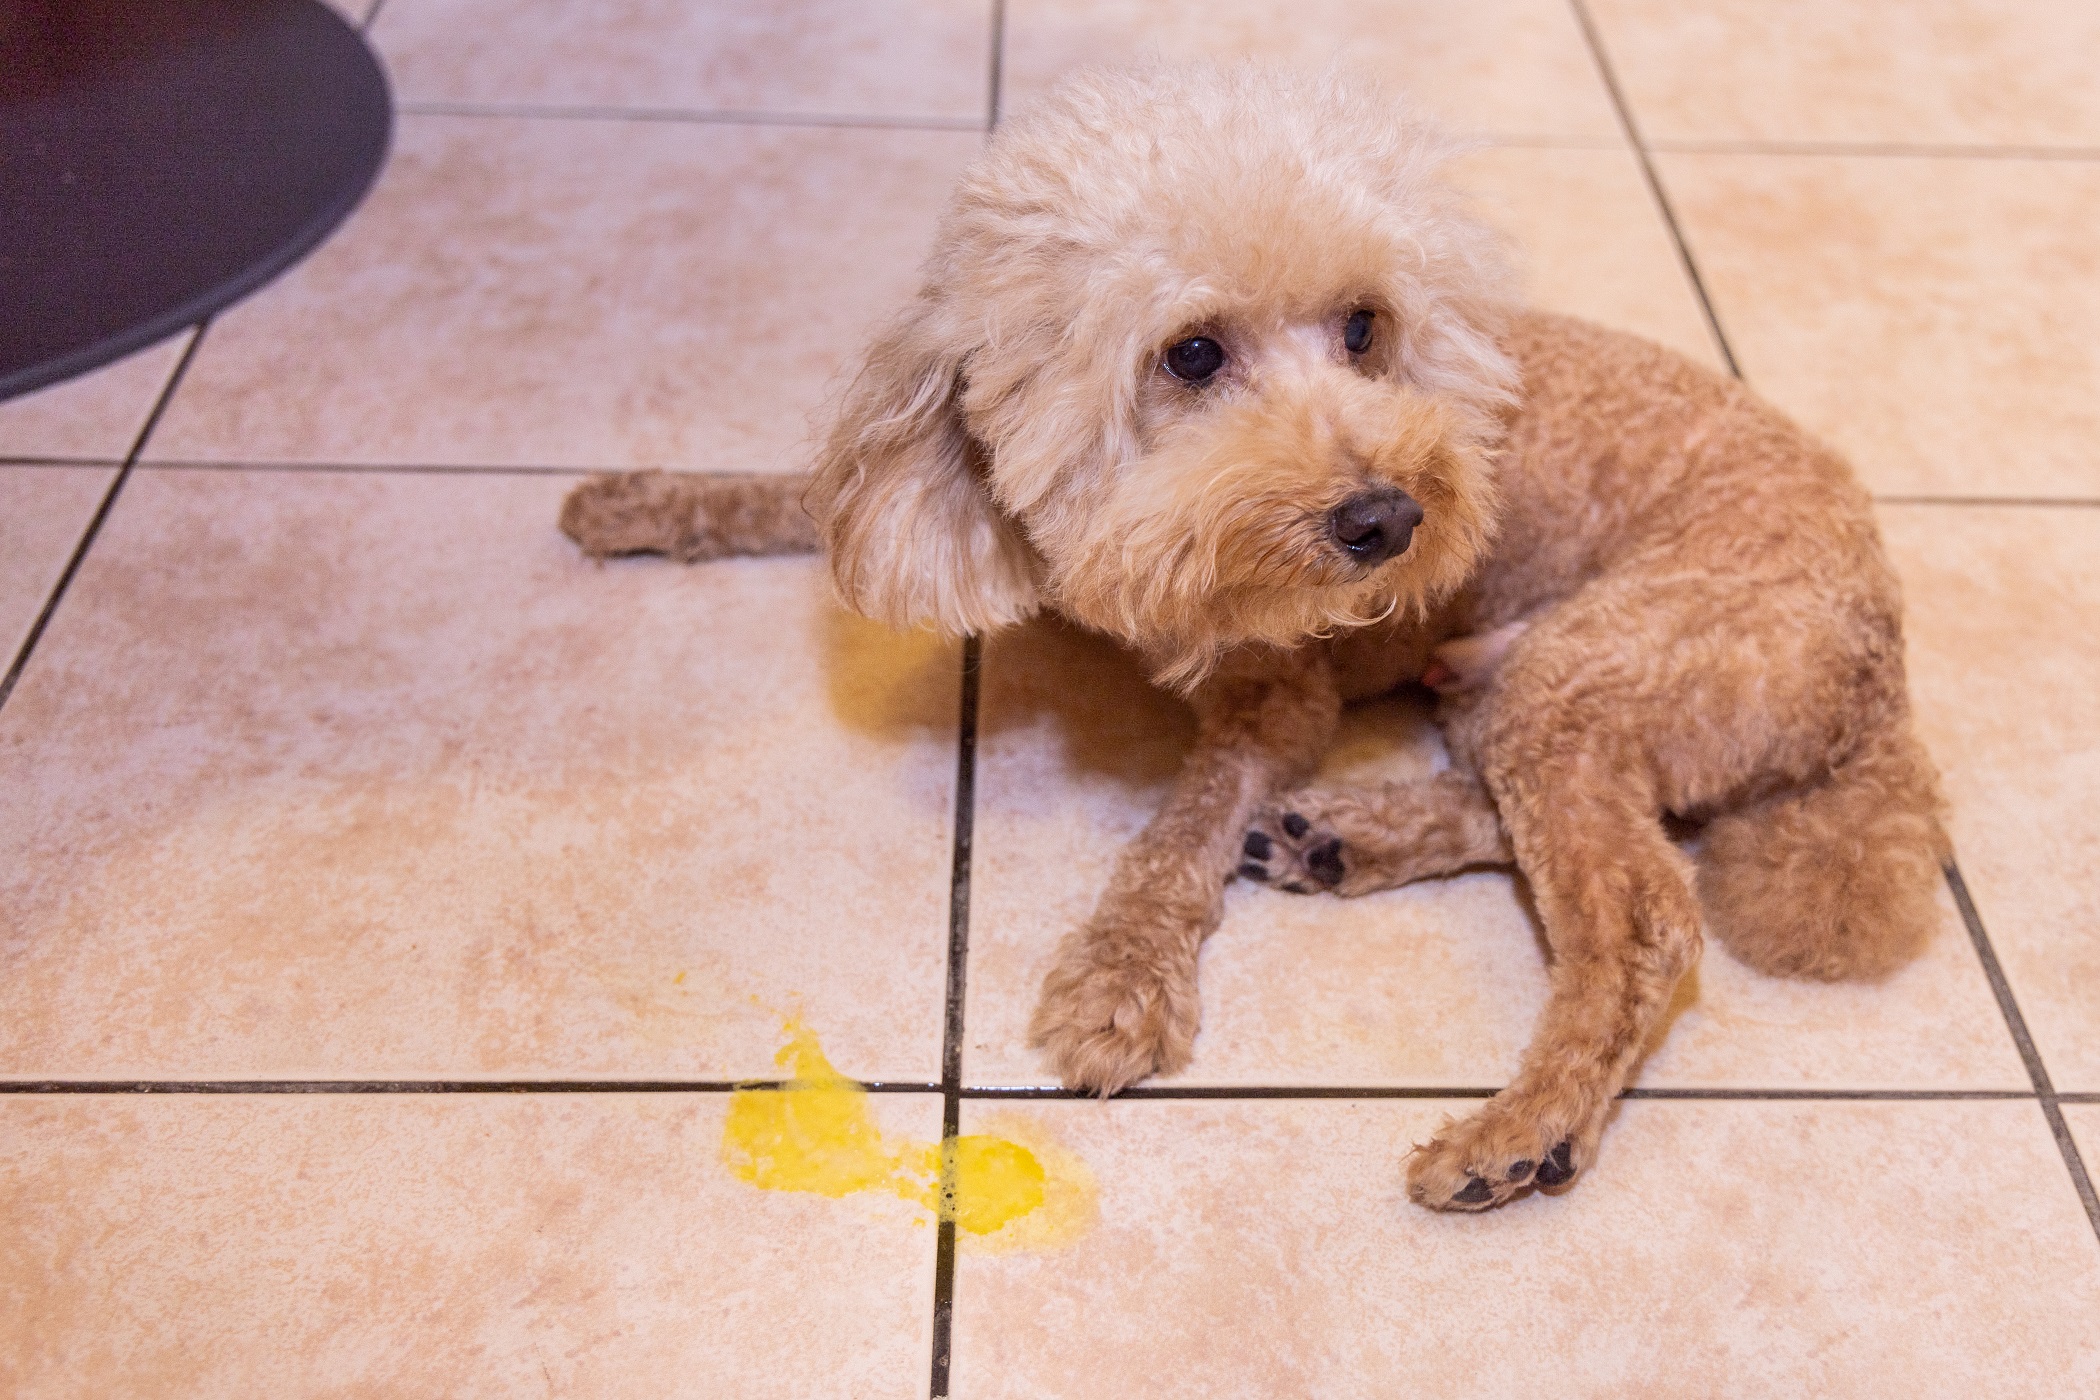 Why is my dog's vomit yellow? - Vet Help Direct